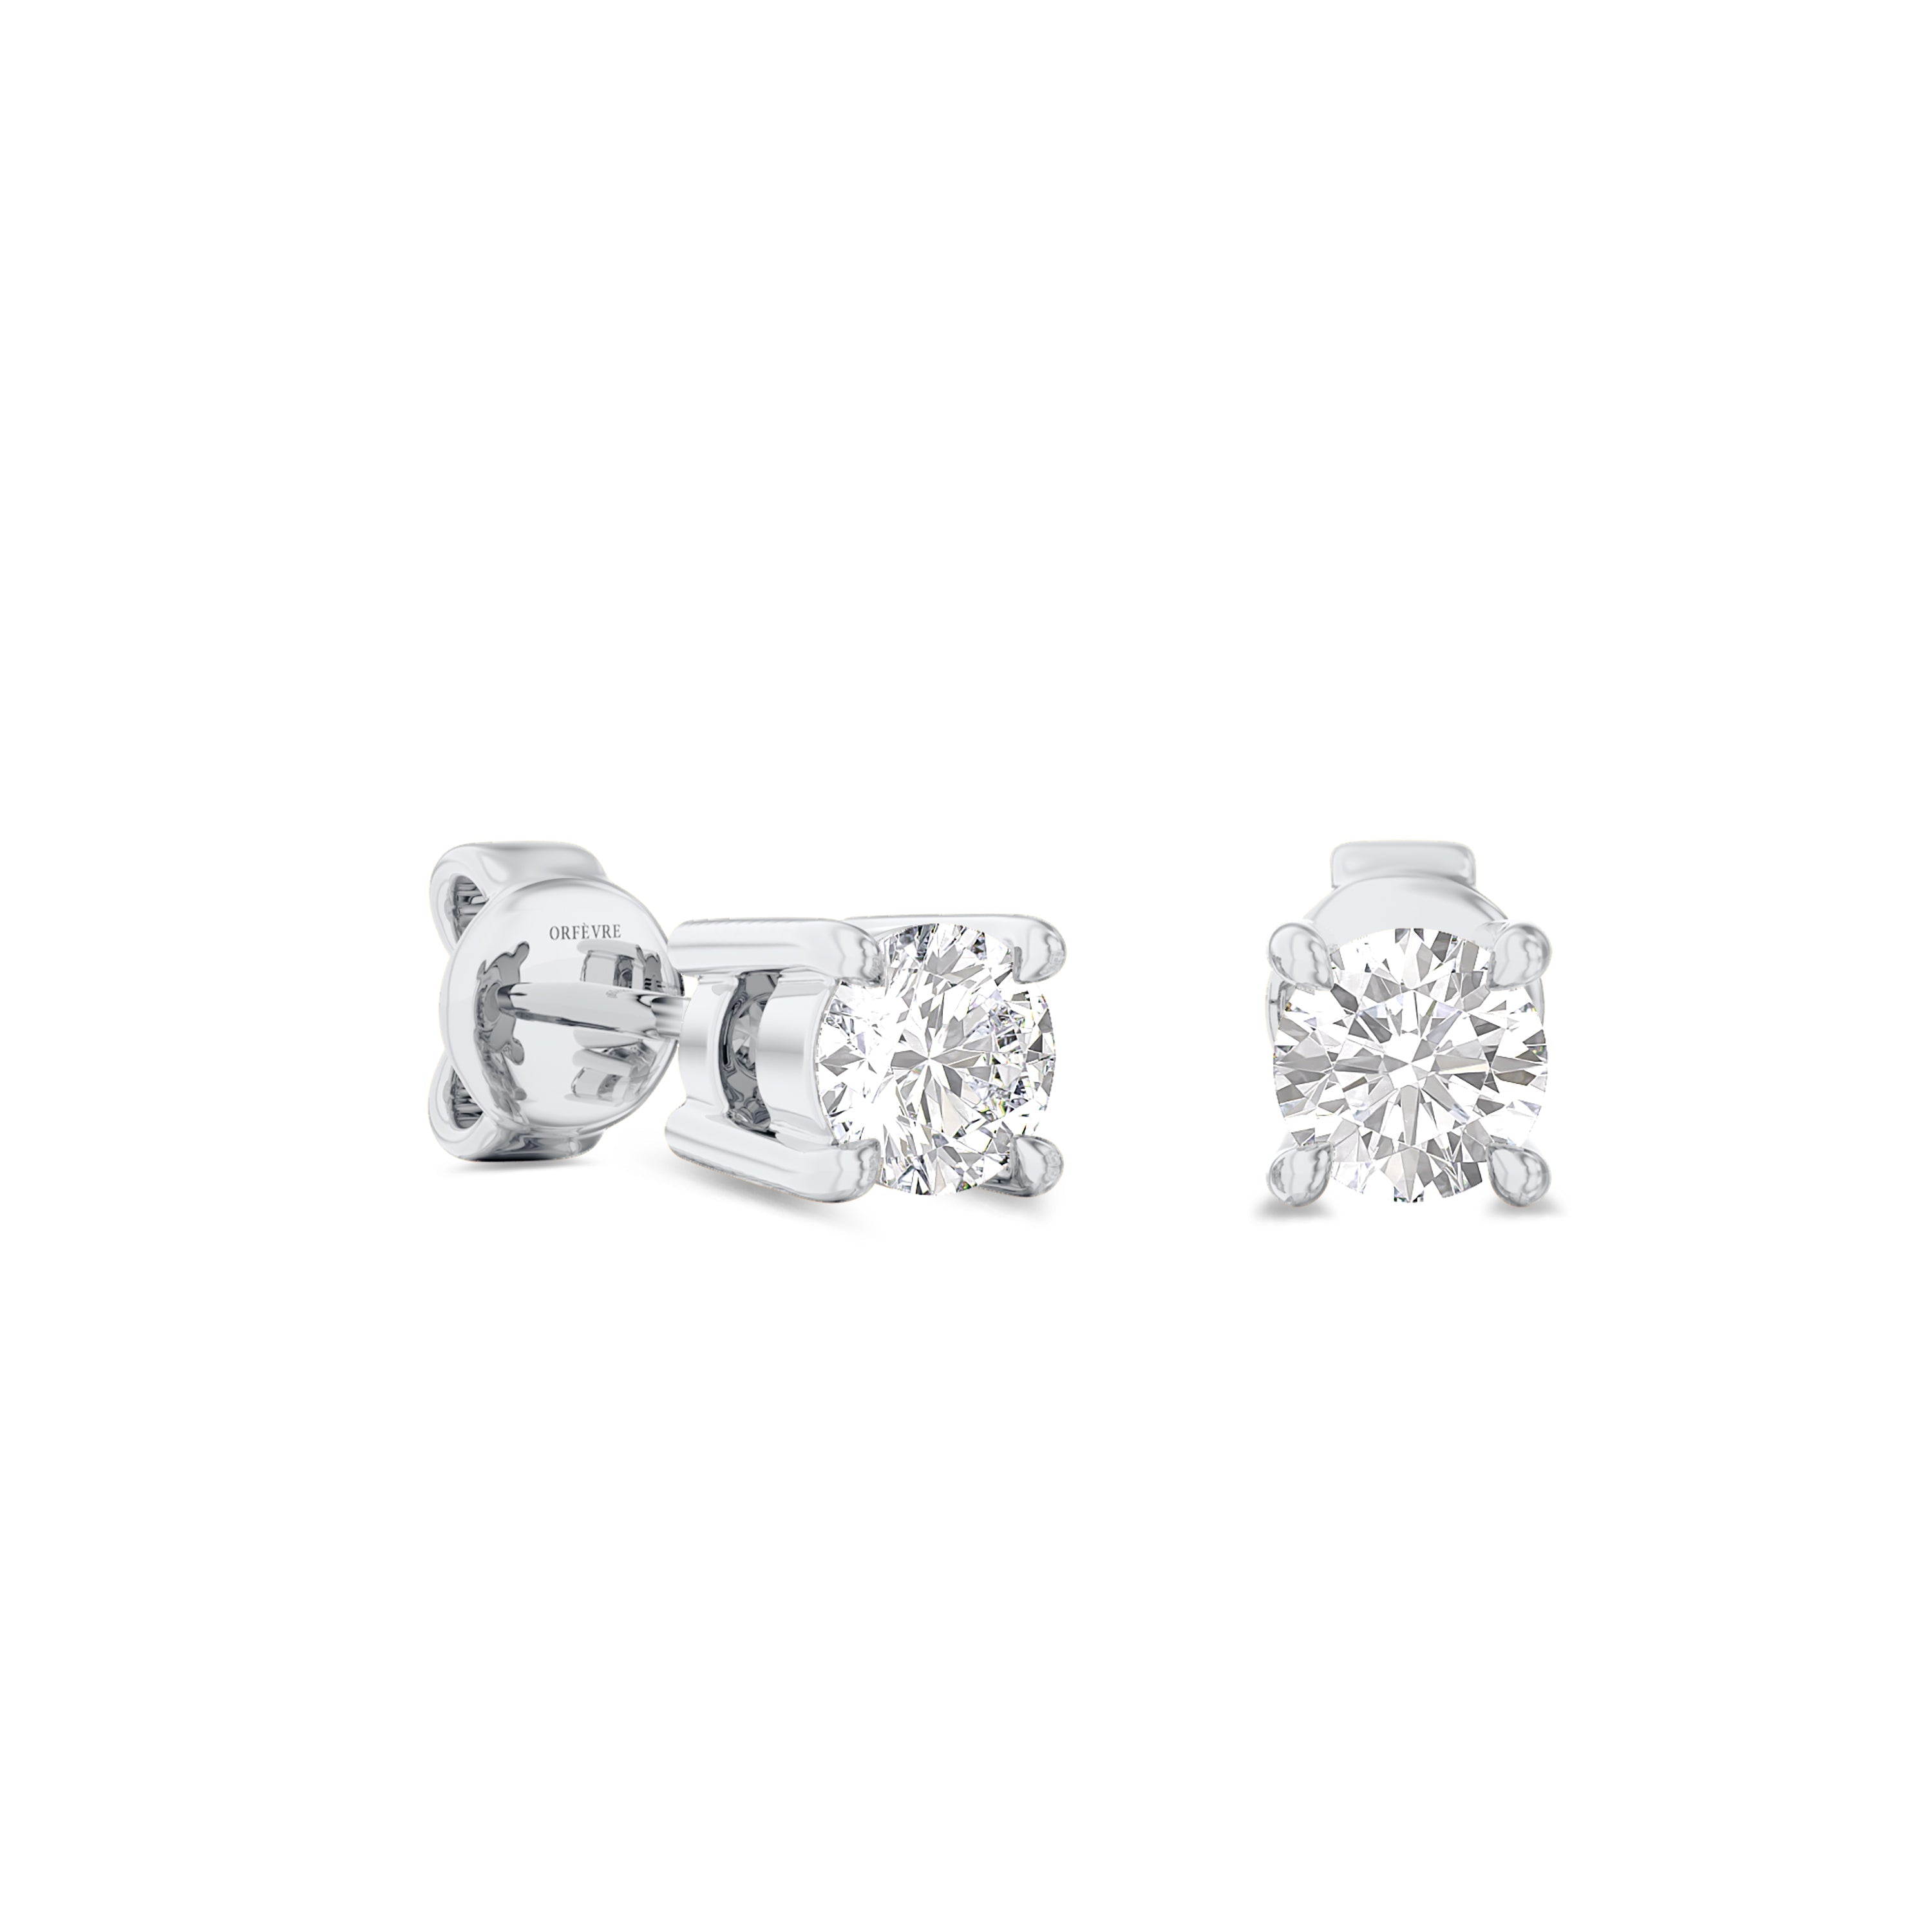 0.20 carat solitaire round cut diamond earrings in GH color and SI clarity